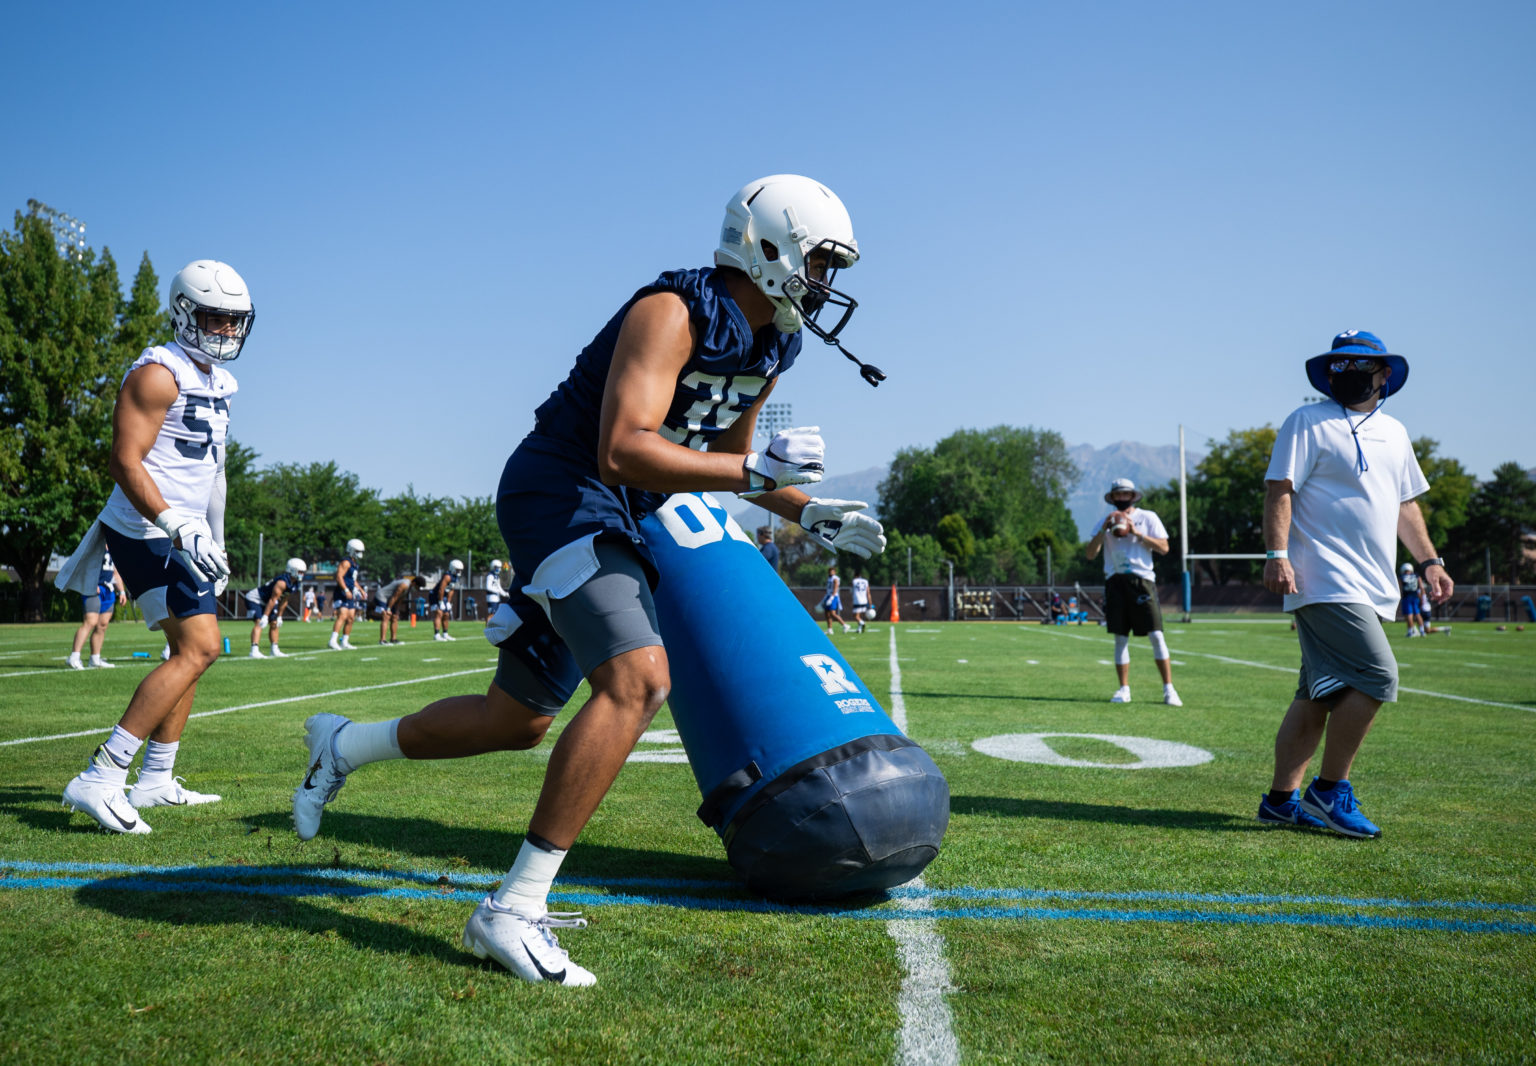 Offseason restrictions highlight BYU Football players’ ‘selfmotivated